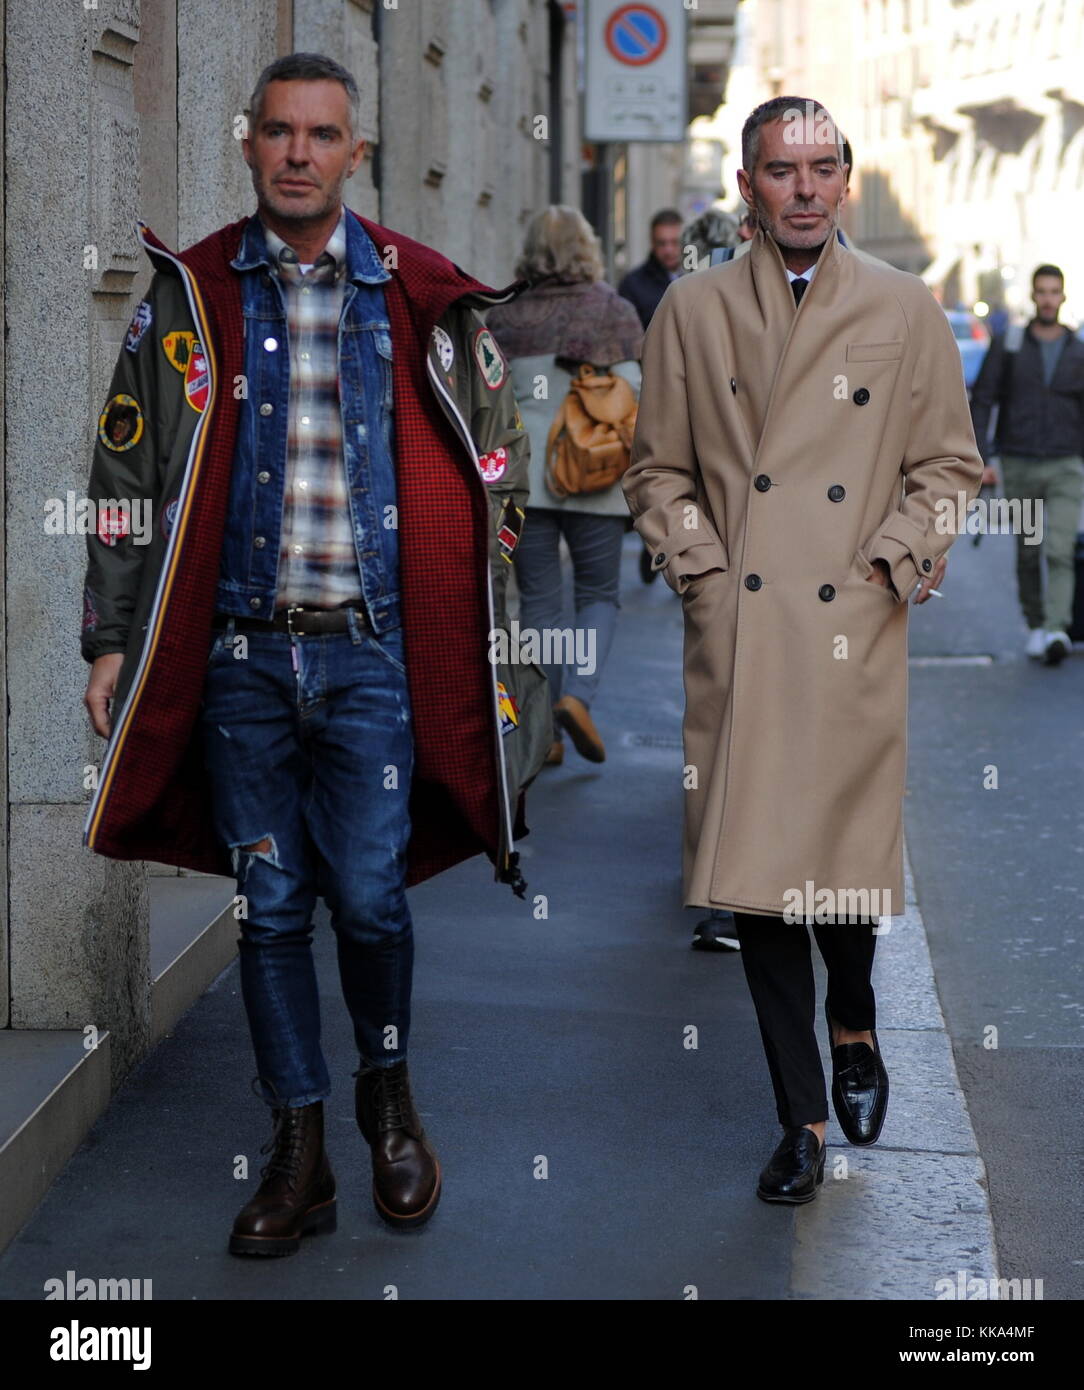 DSQUARED 2 fashion designers, Dean and Dan Caten spotted walking through  downtown Milan Featuring: Dean Caten, Dan Caten Where: Milan, Italy When:  28 Oct 2017 Credit: IPA/WENN.com **Only available for publication in